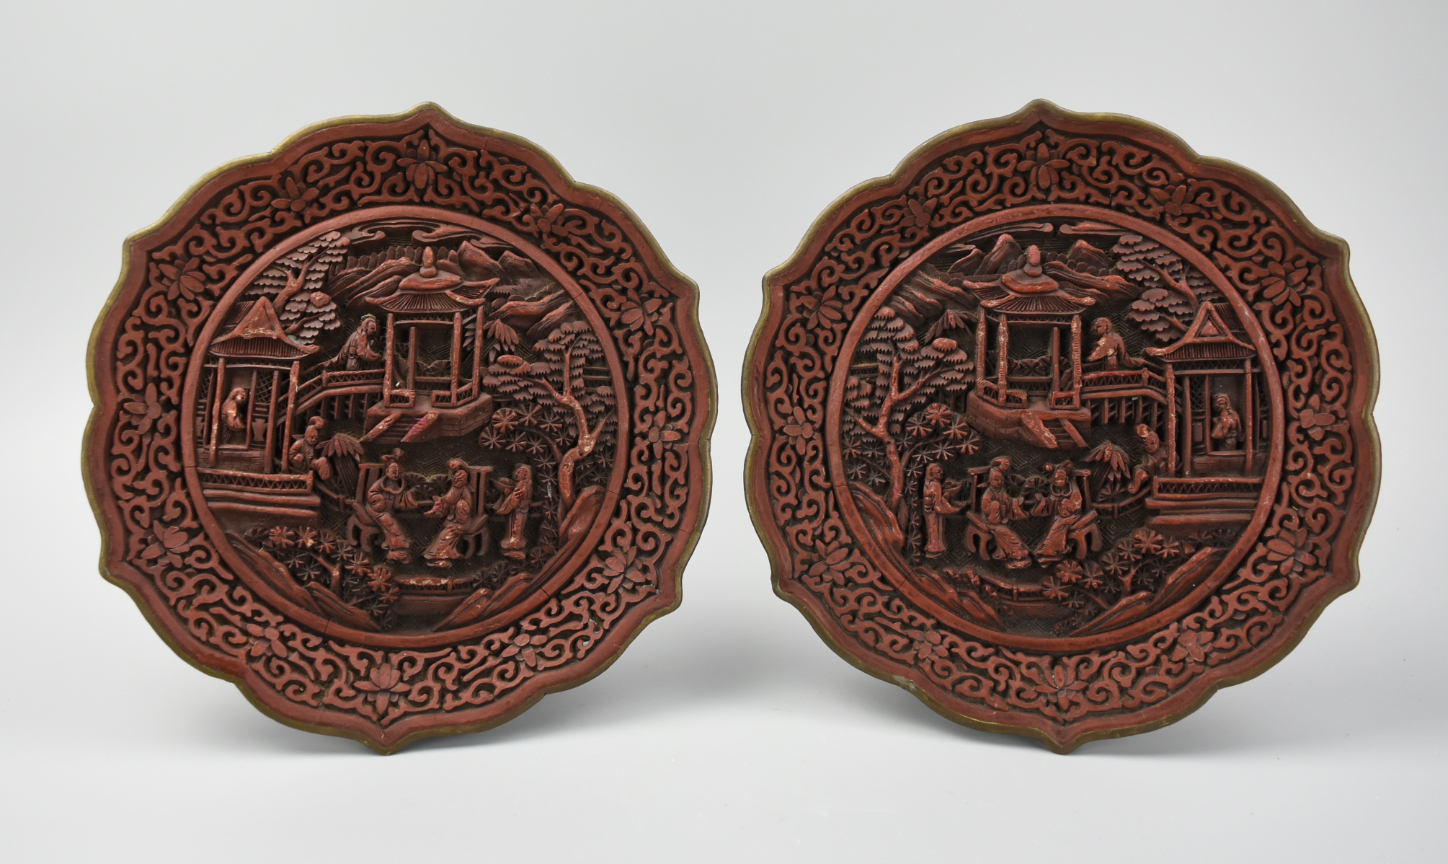 PAIR OF CHINESE LACQUERWARE PLATE 20TH 2cf824